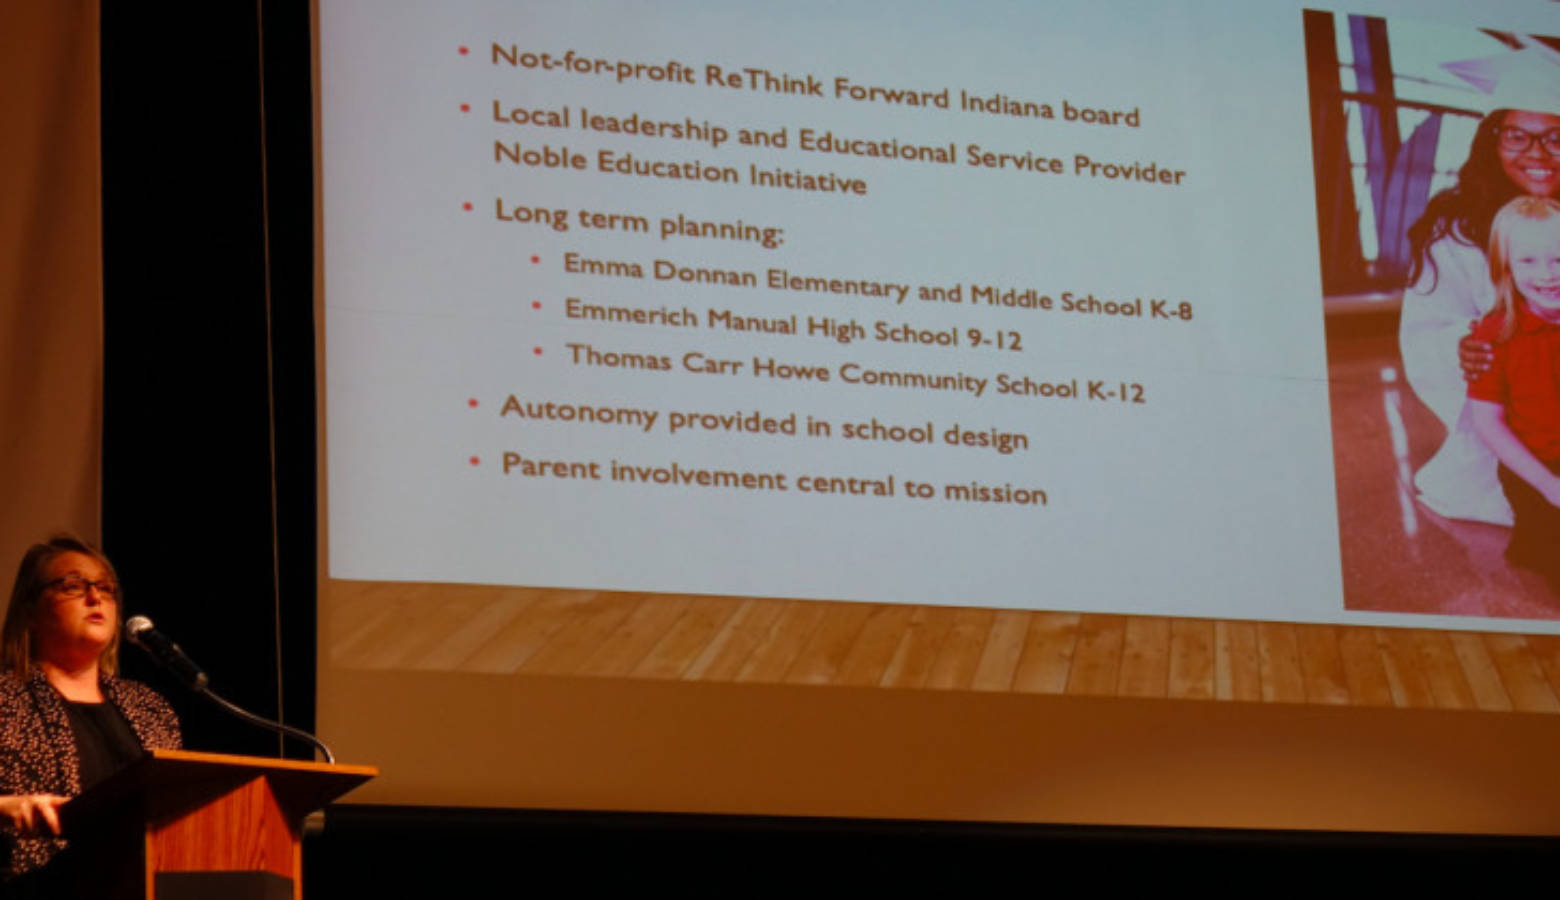 Misty Ndiritu, Noble Education Initiative's Indiana State Director, talks during a public hearing on the charter applications for three schools under state takeover on Monday, Nov. 25, 2019.